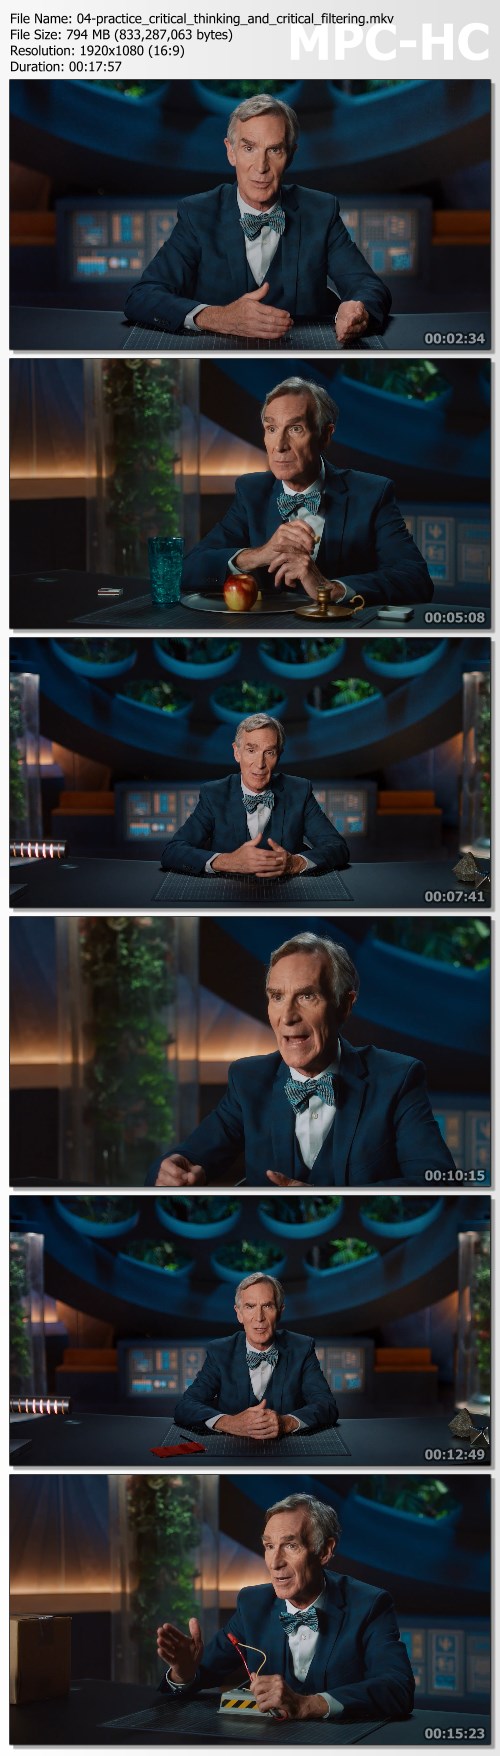 MasterClass - Bill Nye Teaches Science and Problem-Solving